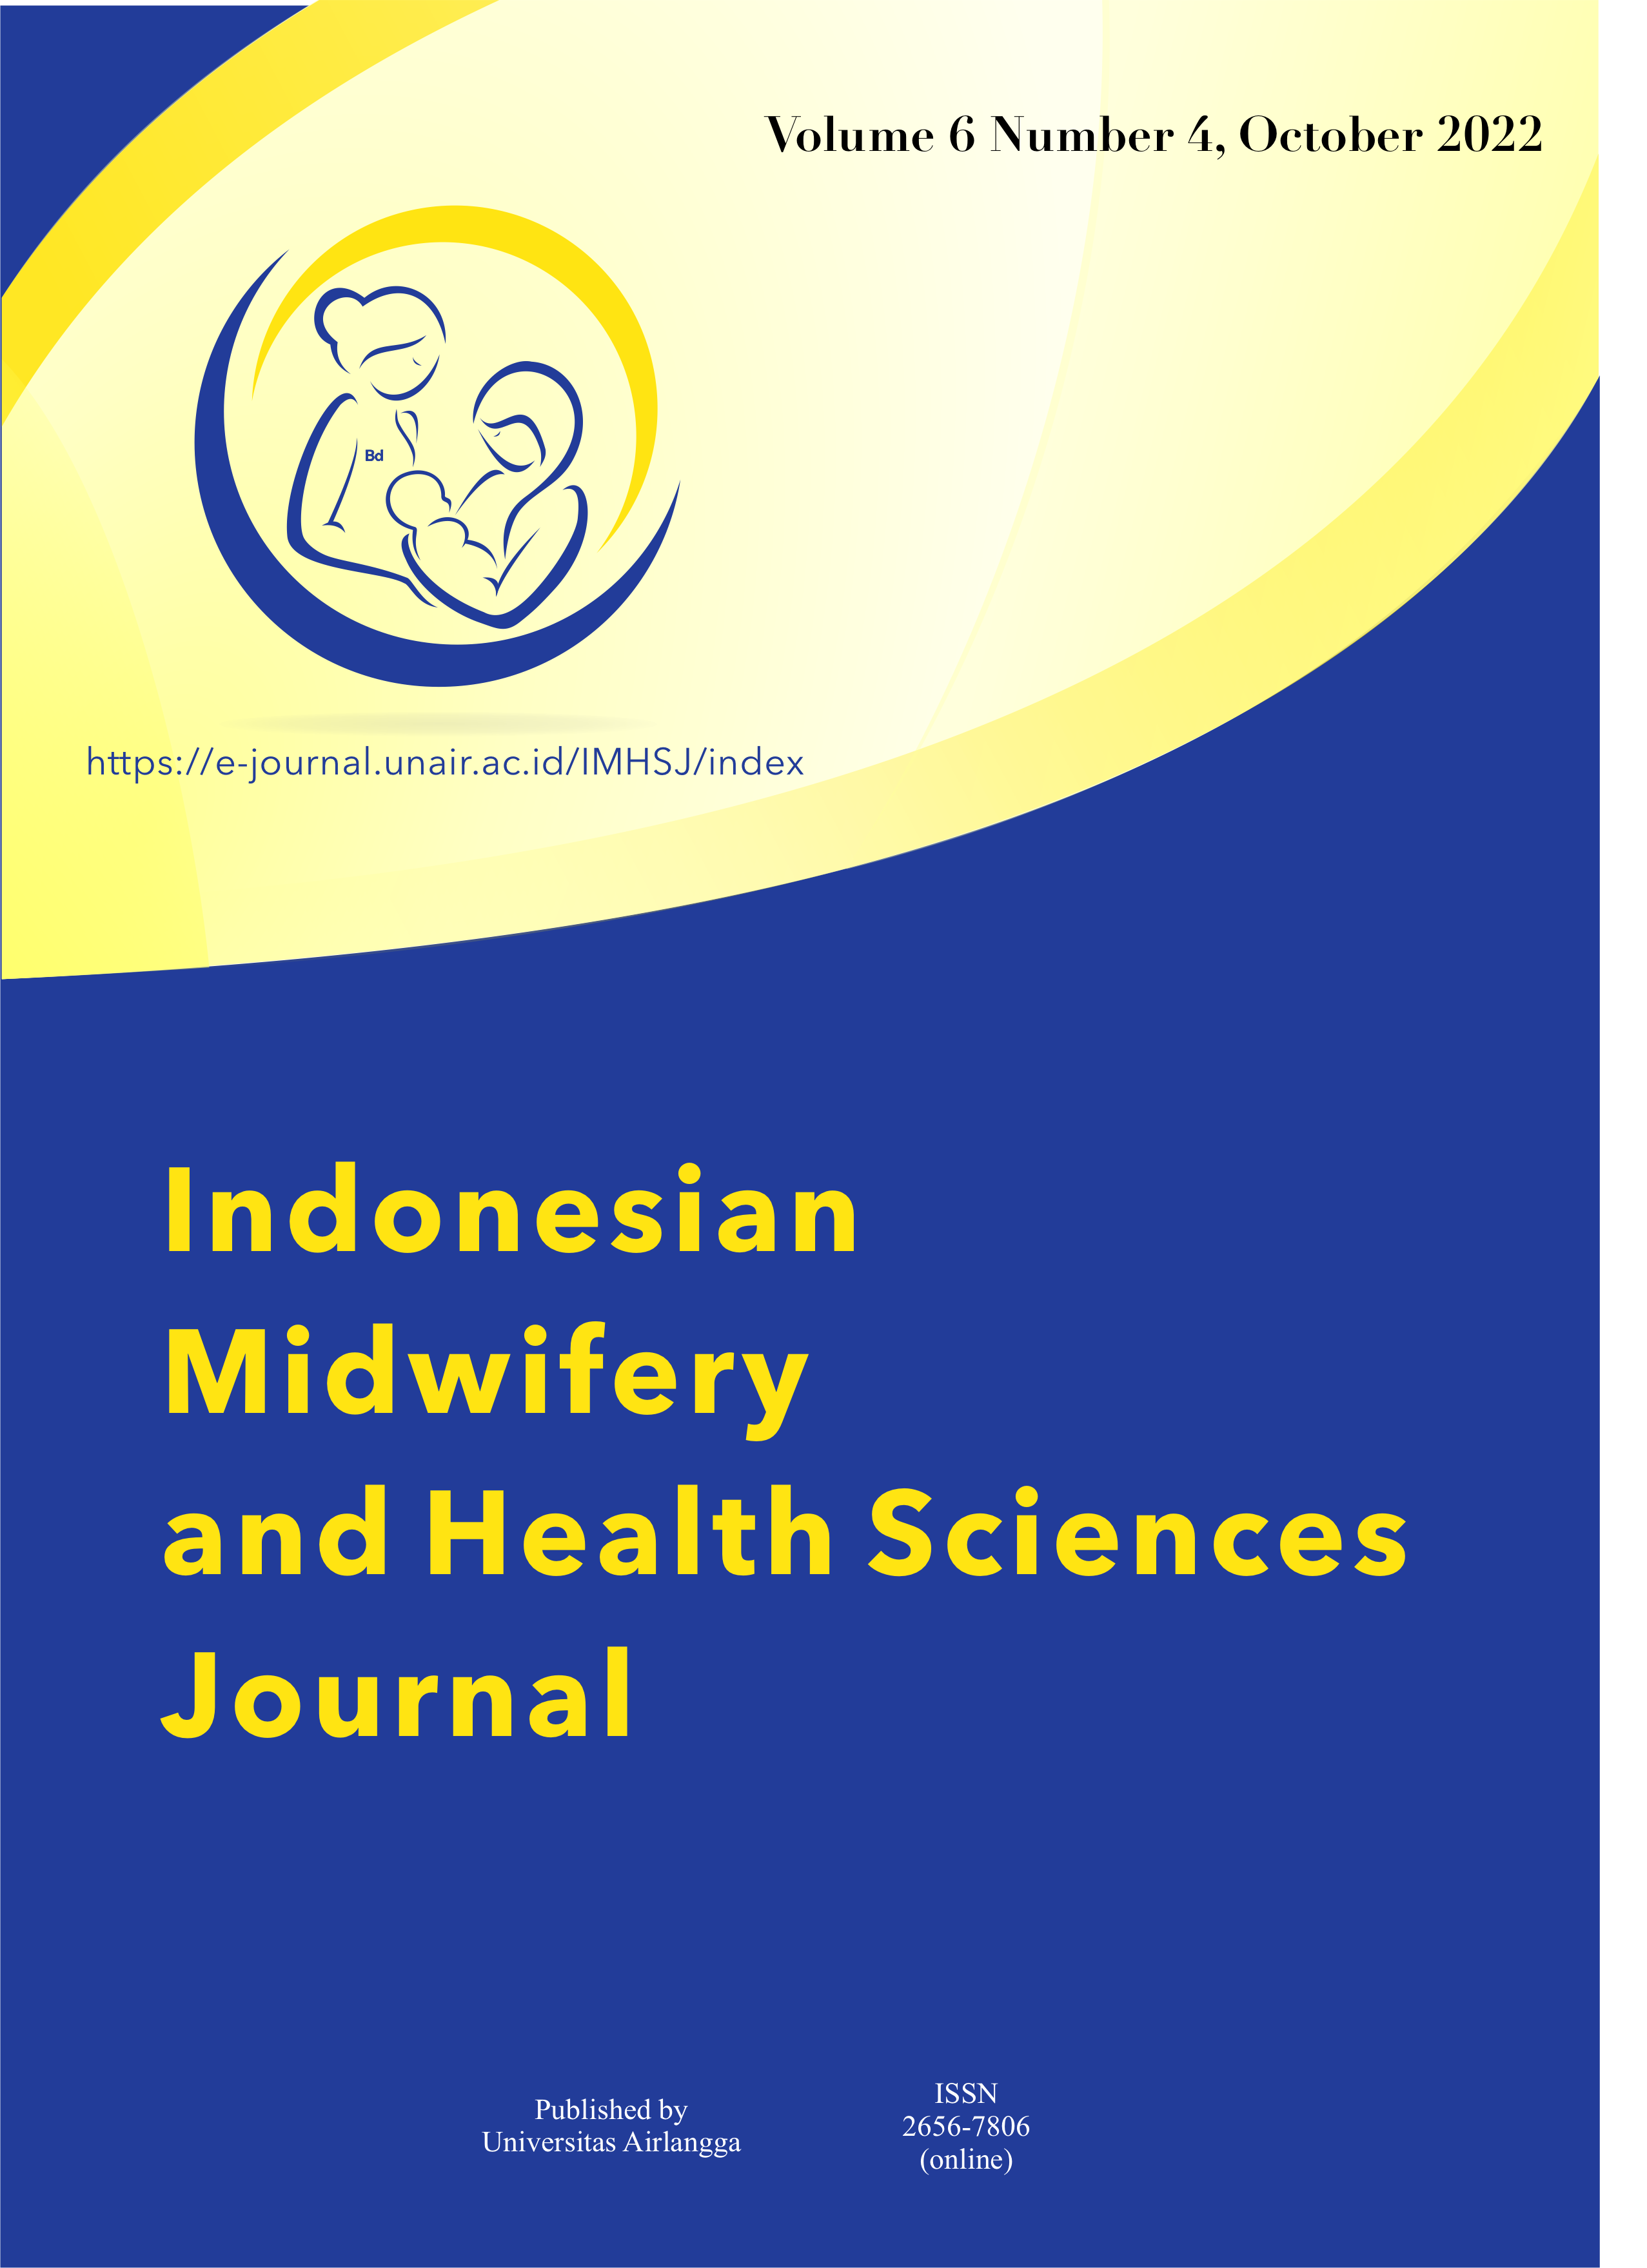 						View Vol. 6 No. 4 (2022): Indonesian Midwifery and Health Sciences Journal, October 2022
					